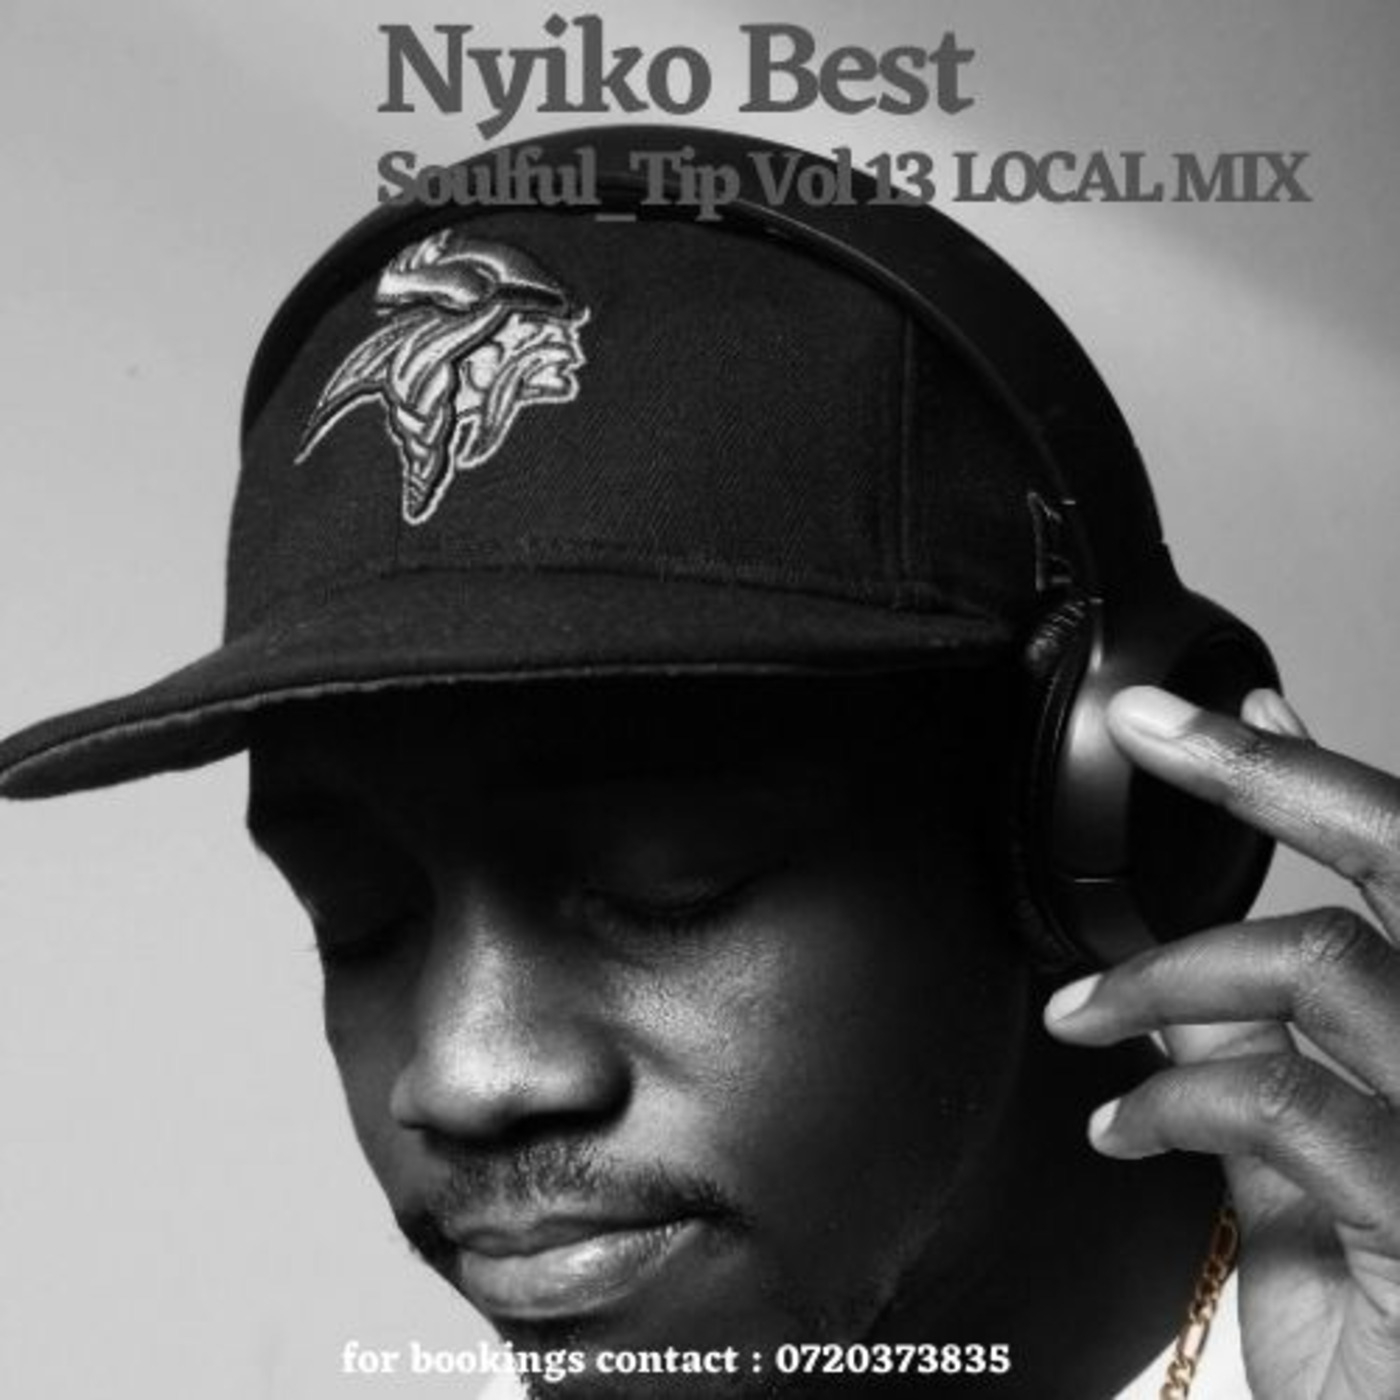 Soulful_Tip Vol 13 Mixed By Nyiko Best Local Mix